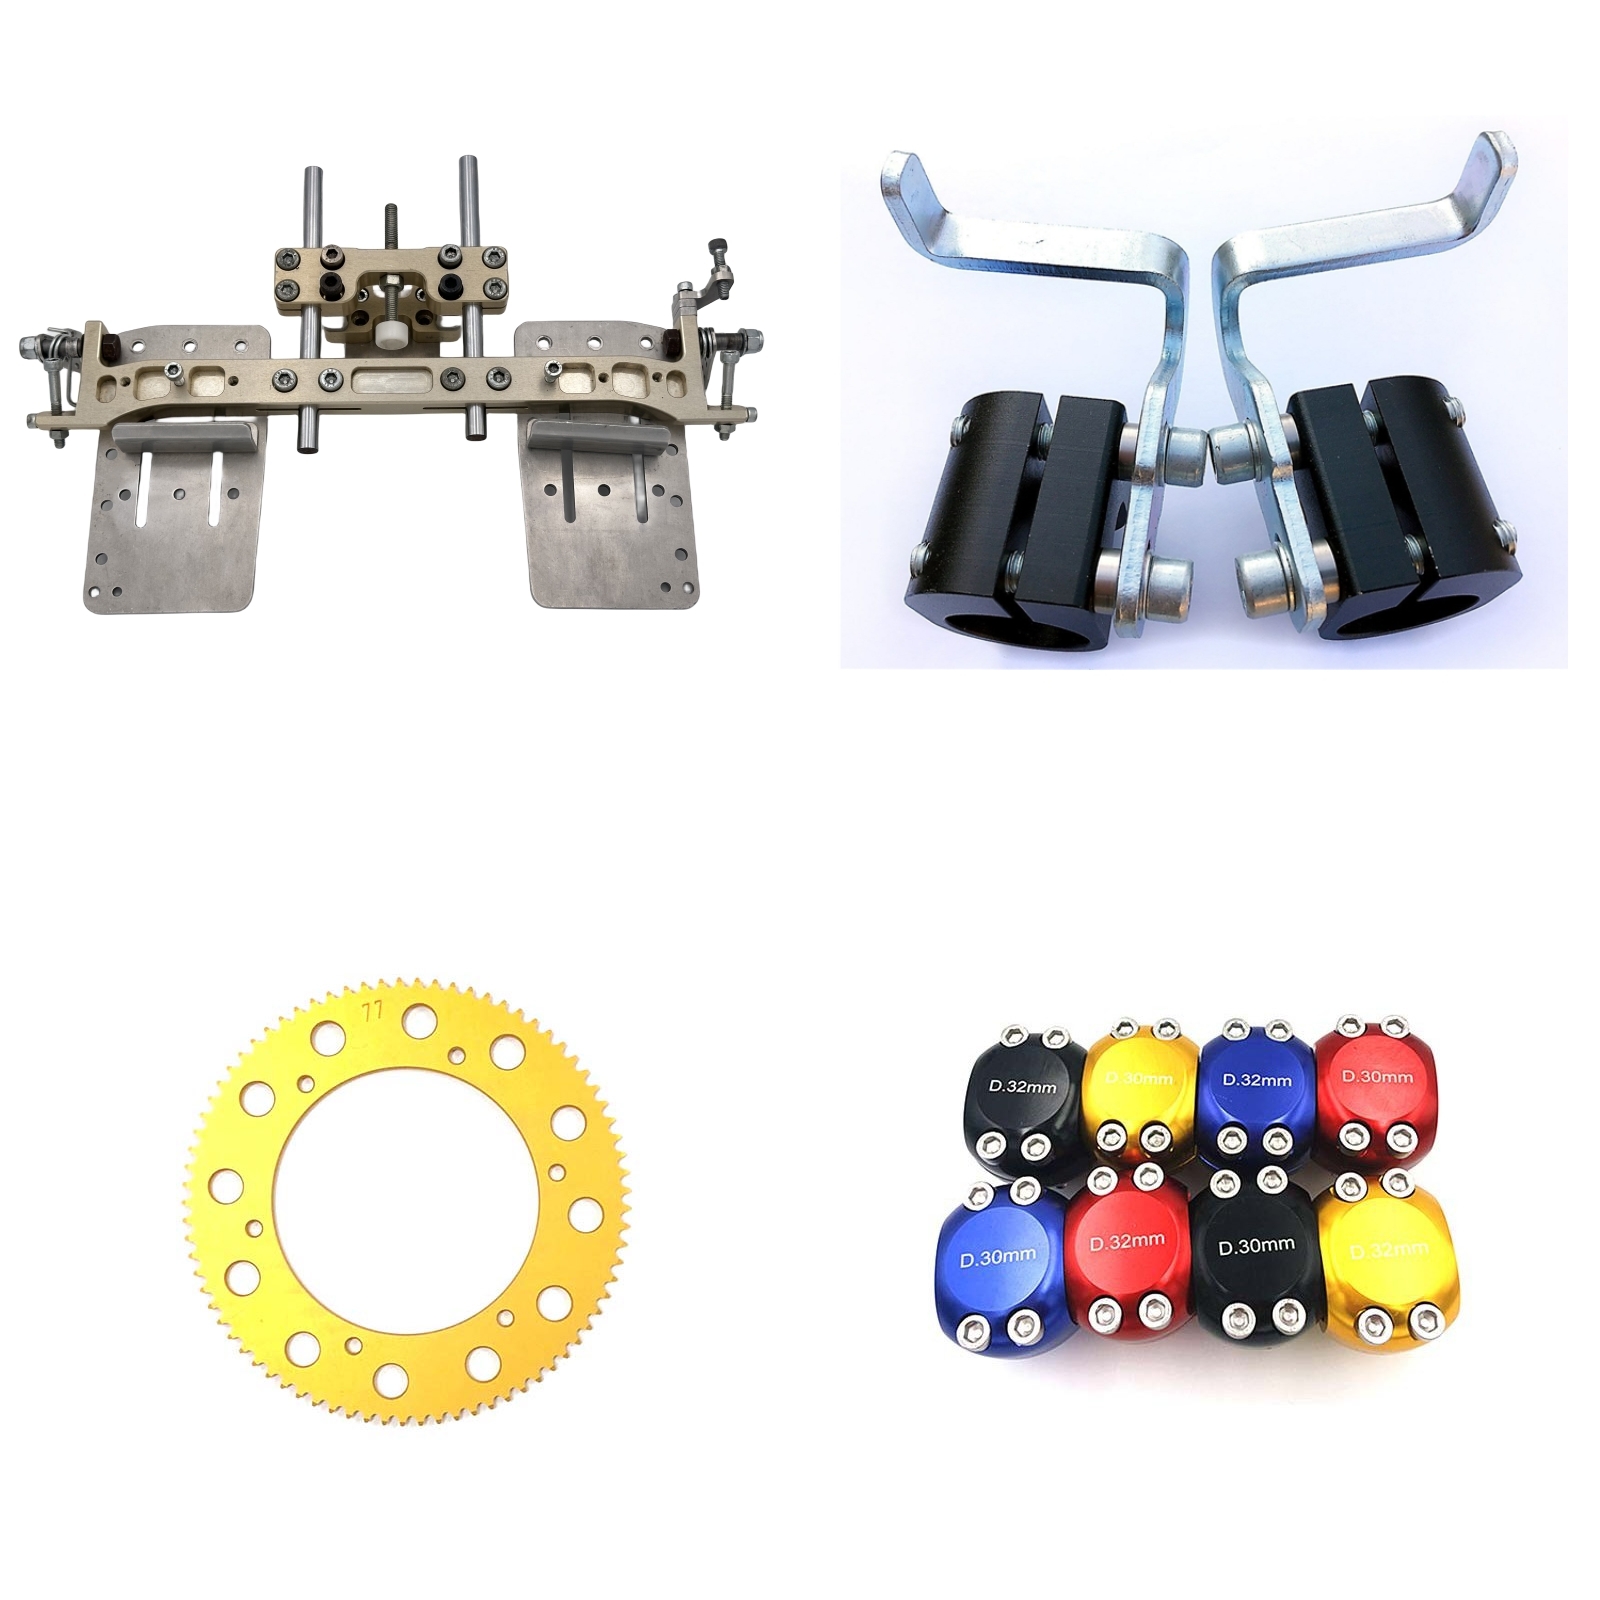 Where can I find reliable go-kart parts suppliers in China?